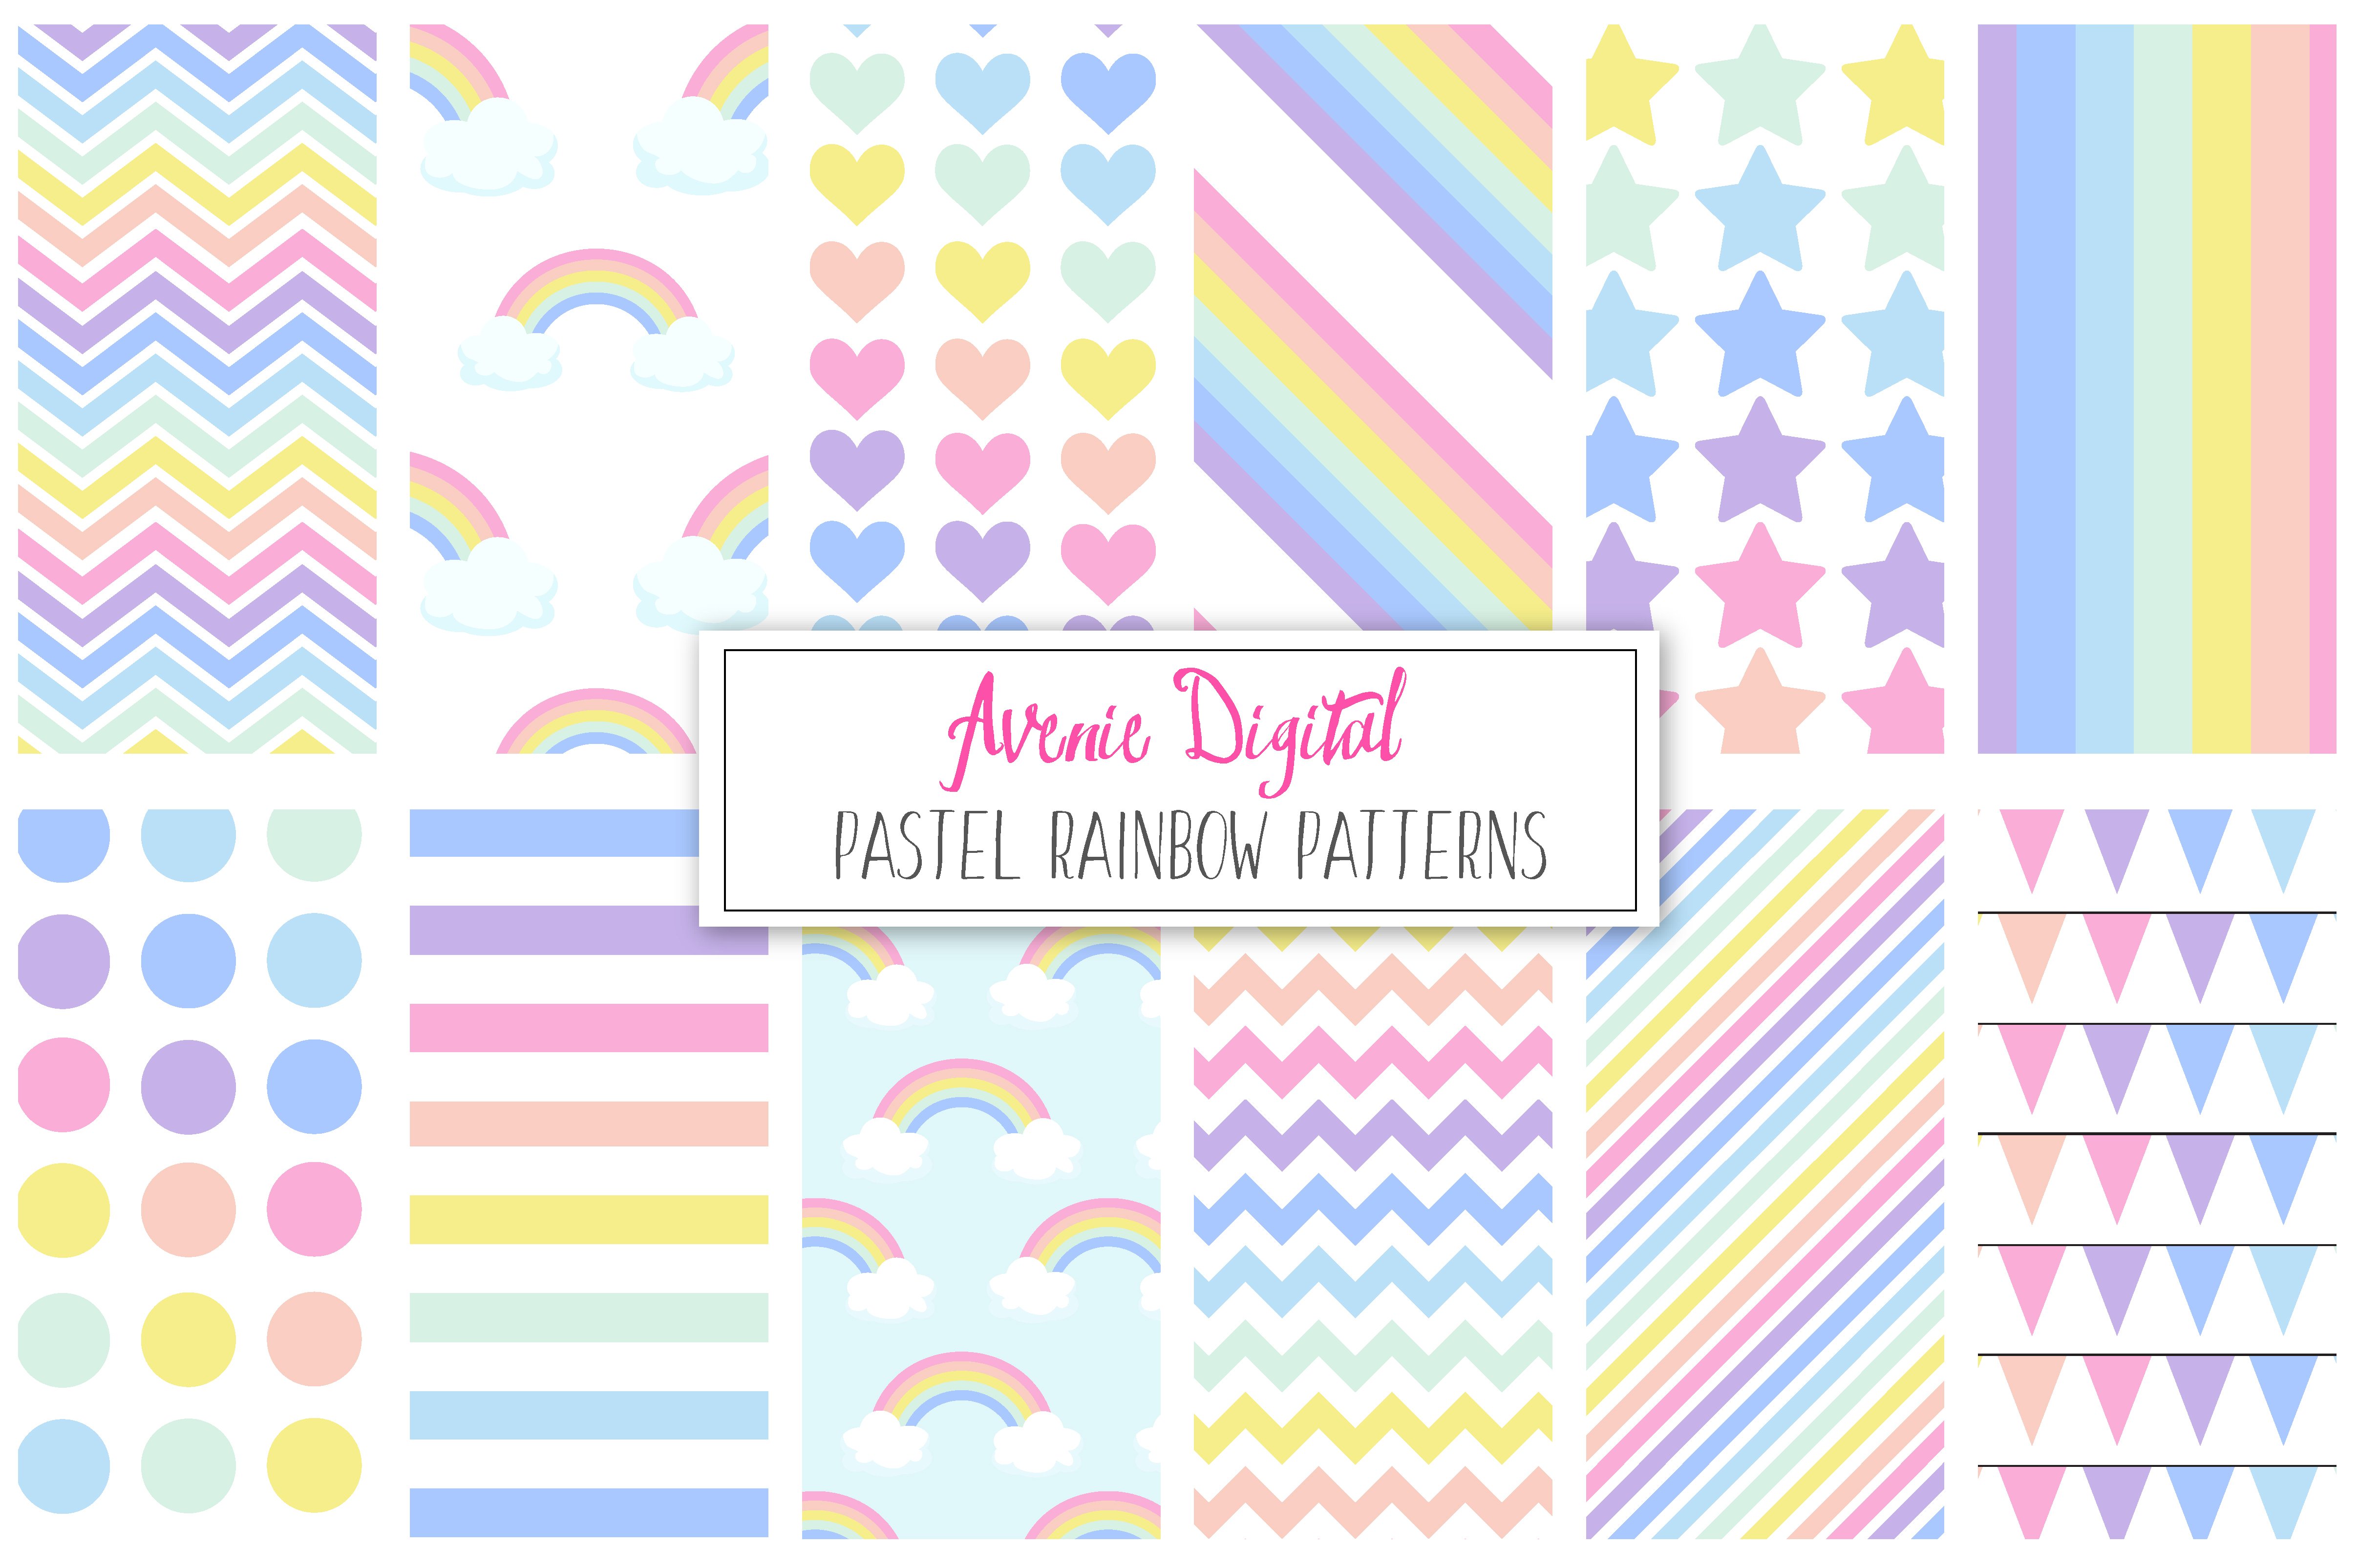 Pastel Rainbow Pattern + Paper cover image.